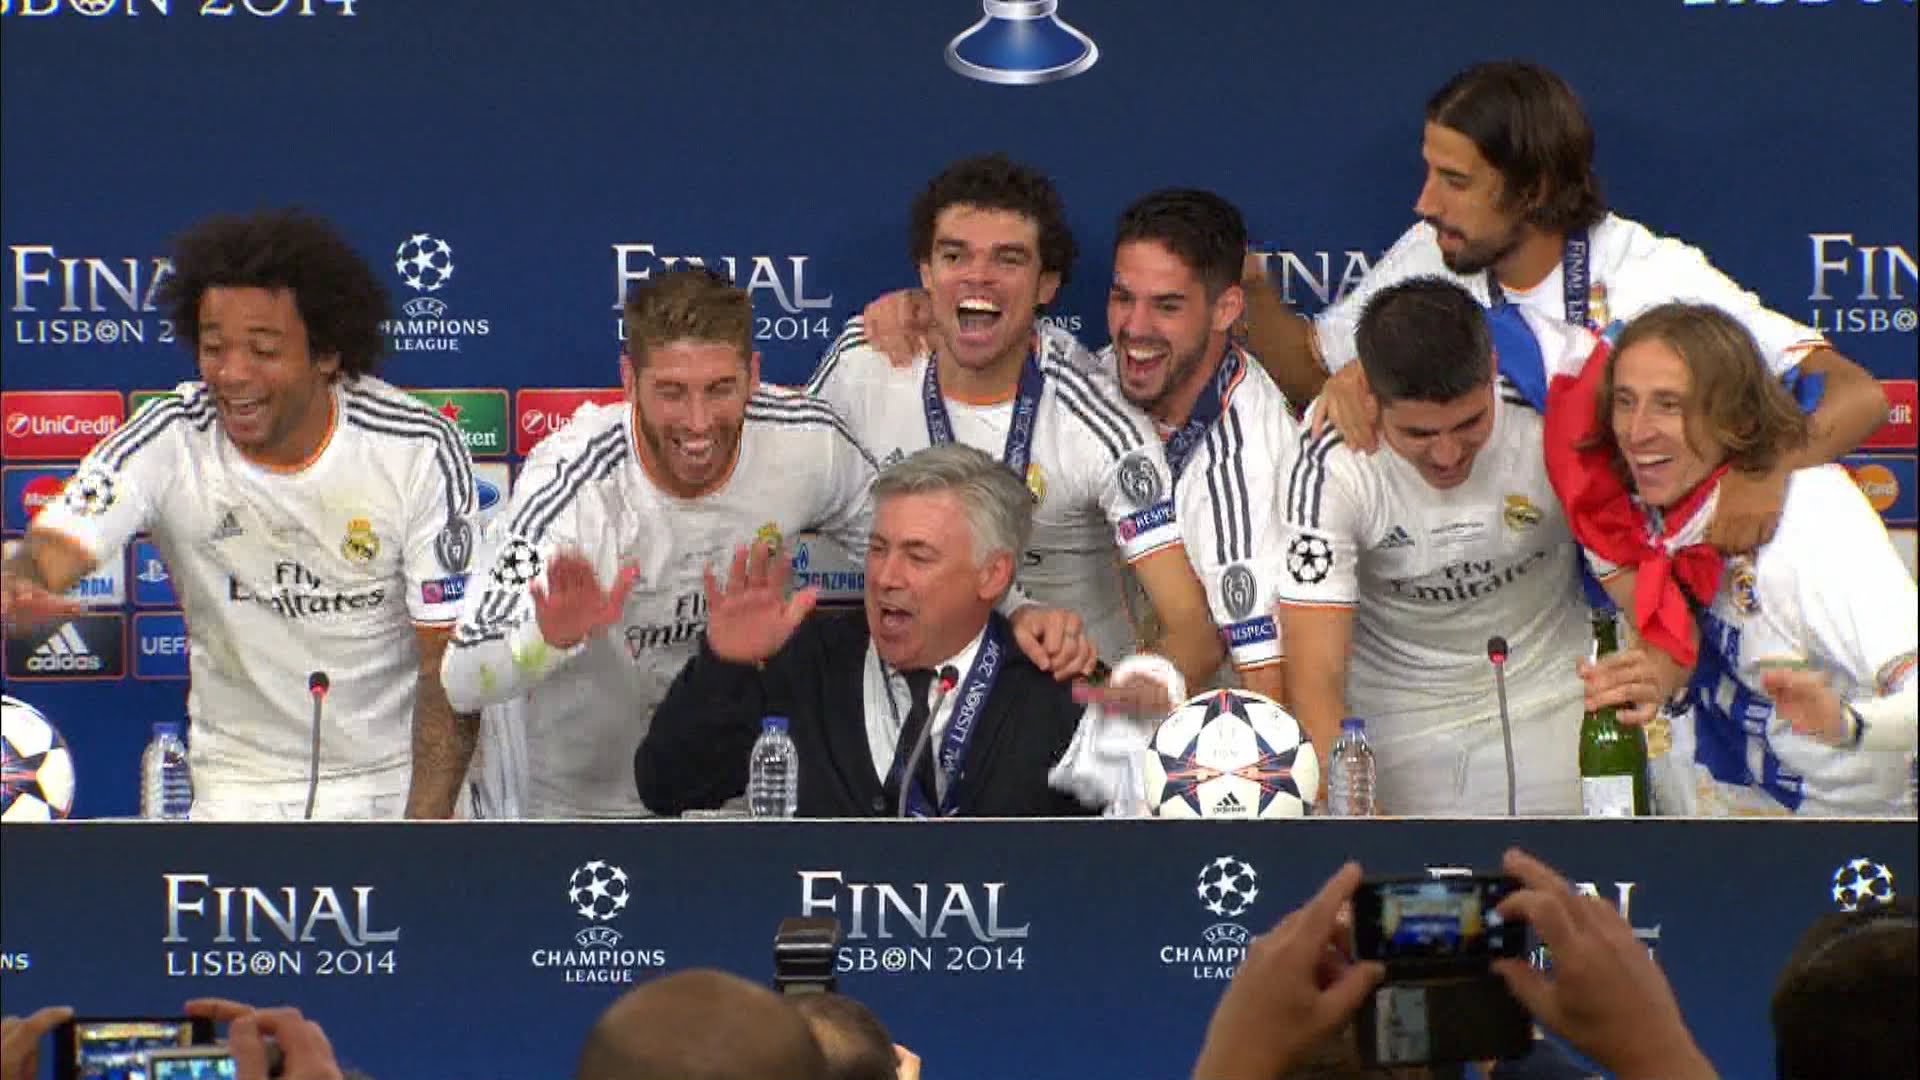 Real Madrid Players Invade Press Conference of Ancelotti - Hilarious!